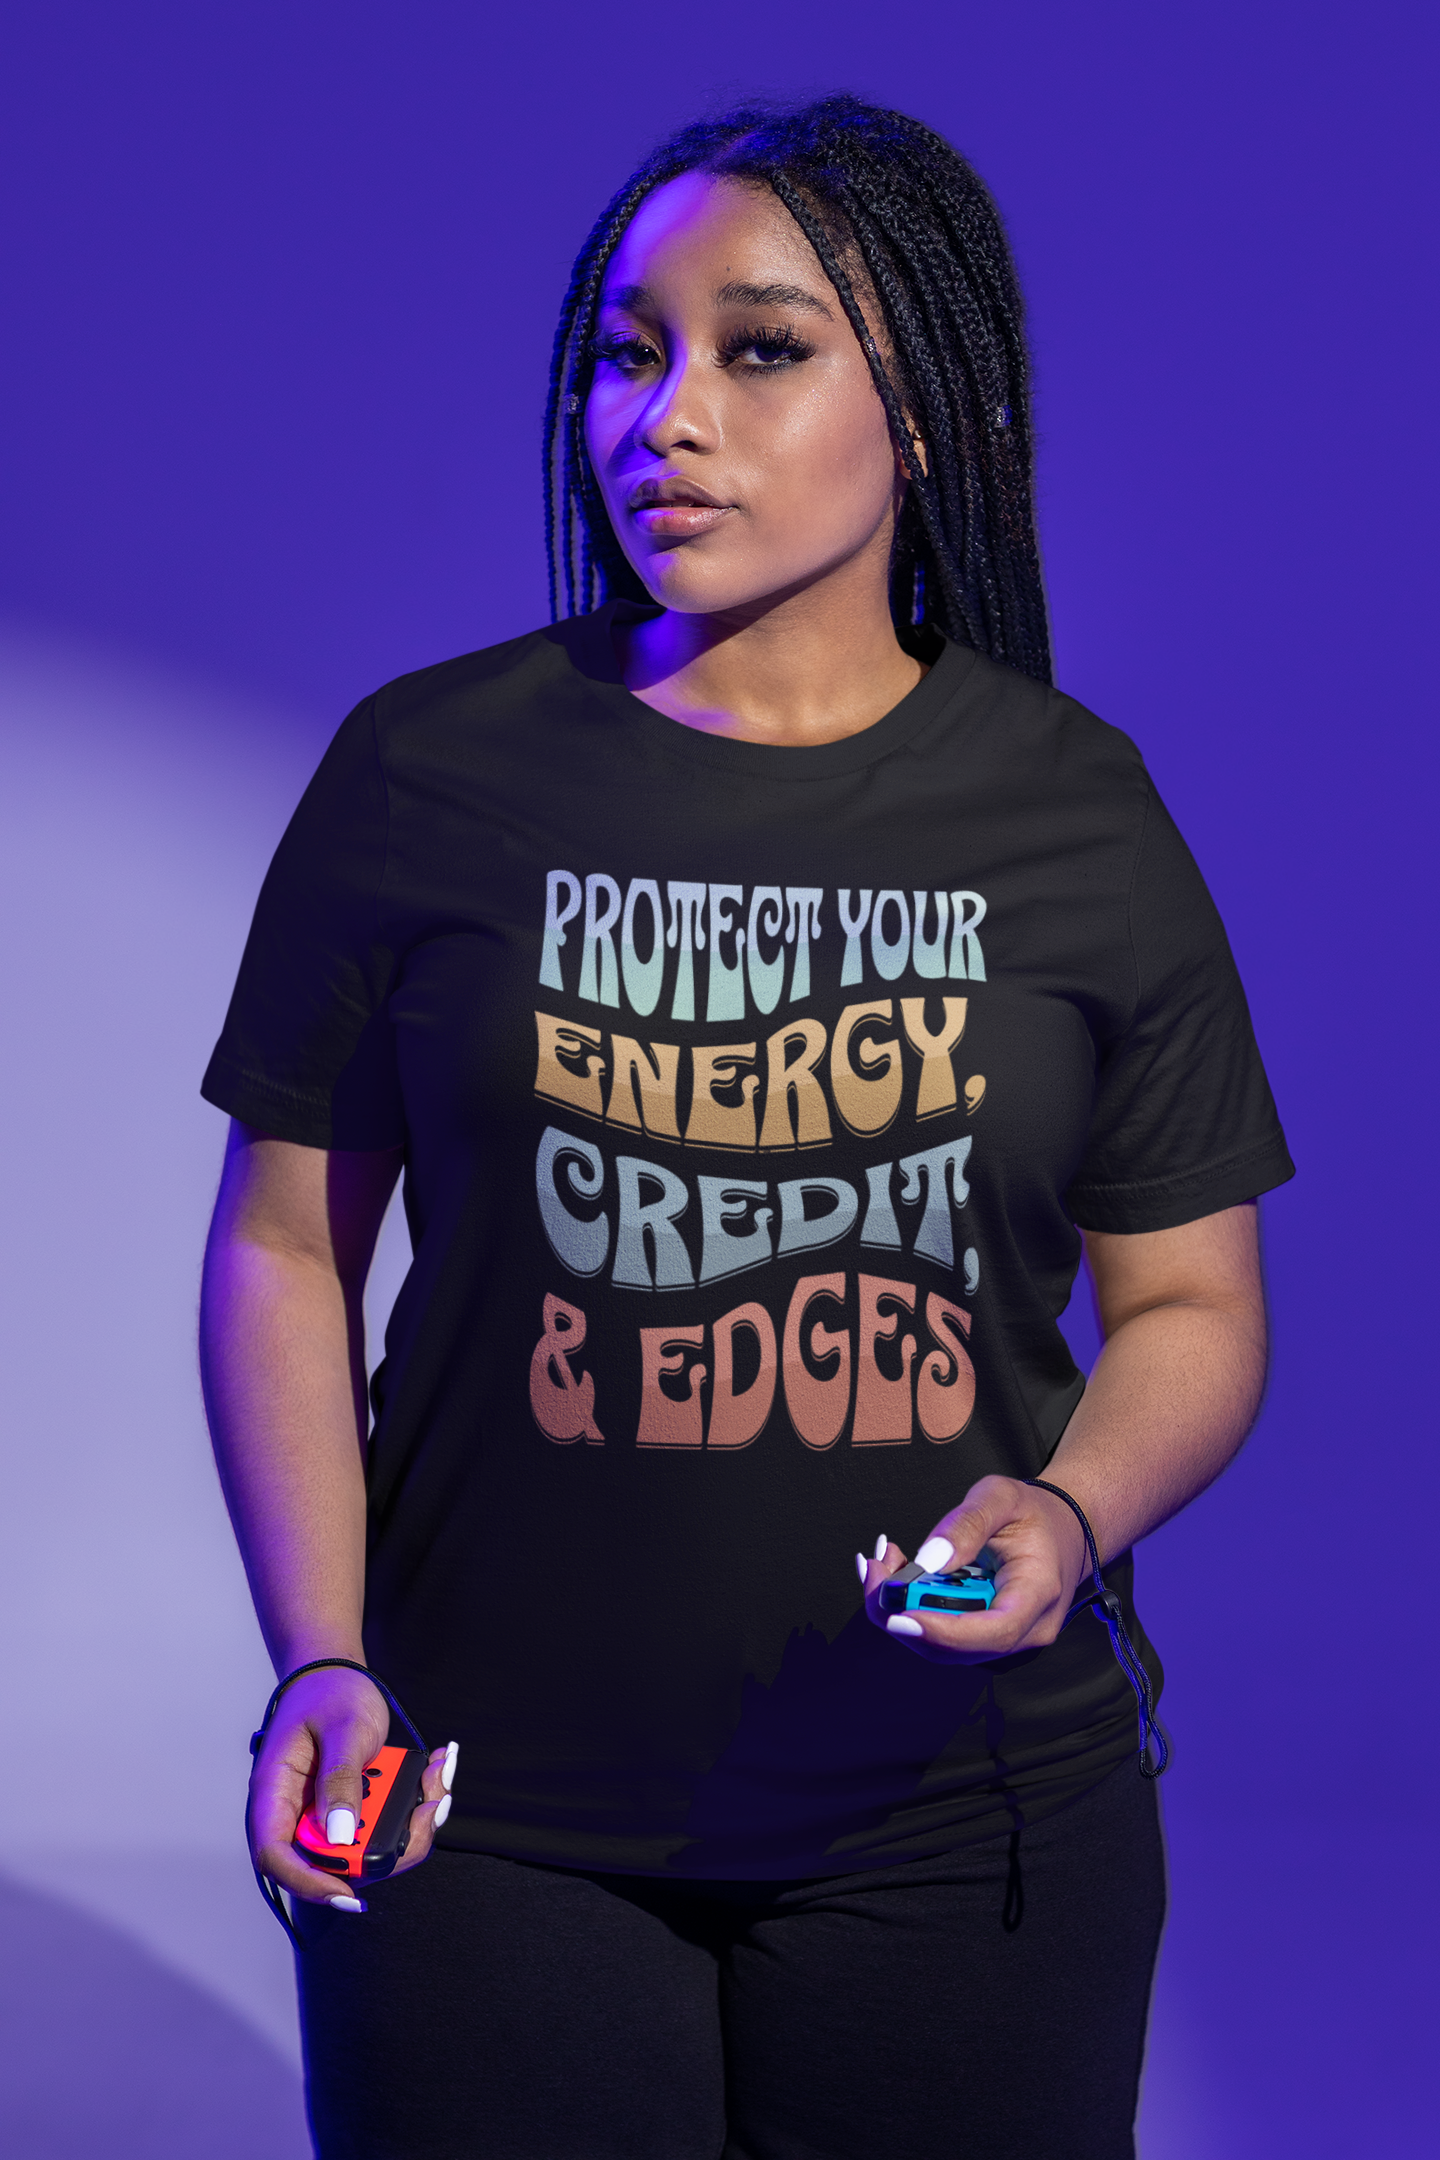 "Protect your energy, credit, and edges"